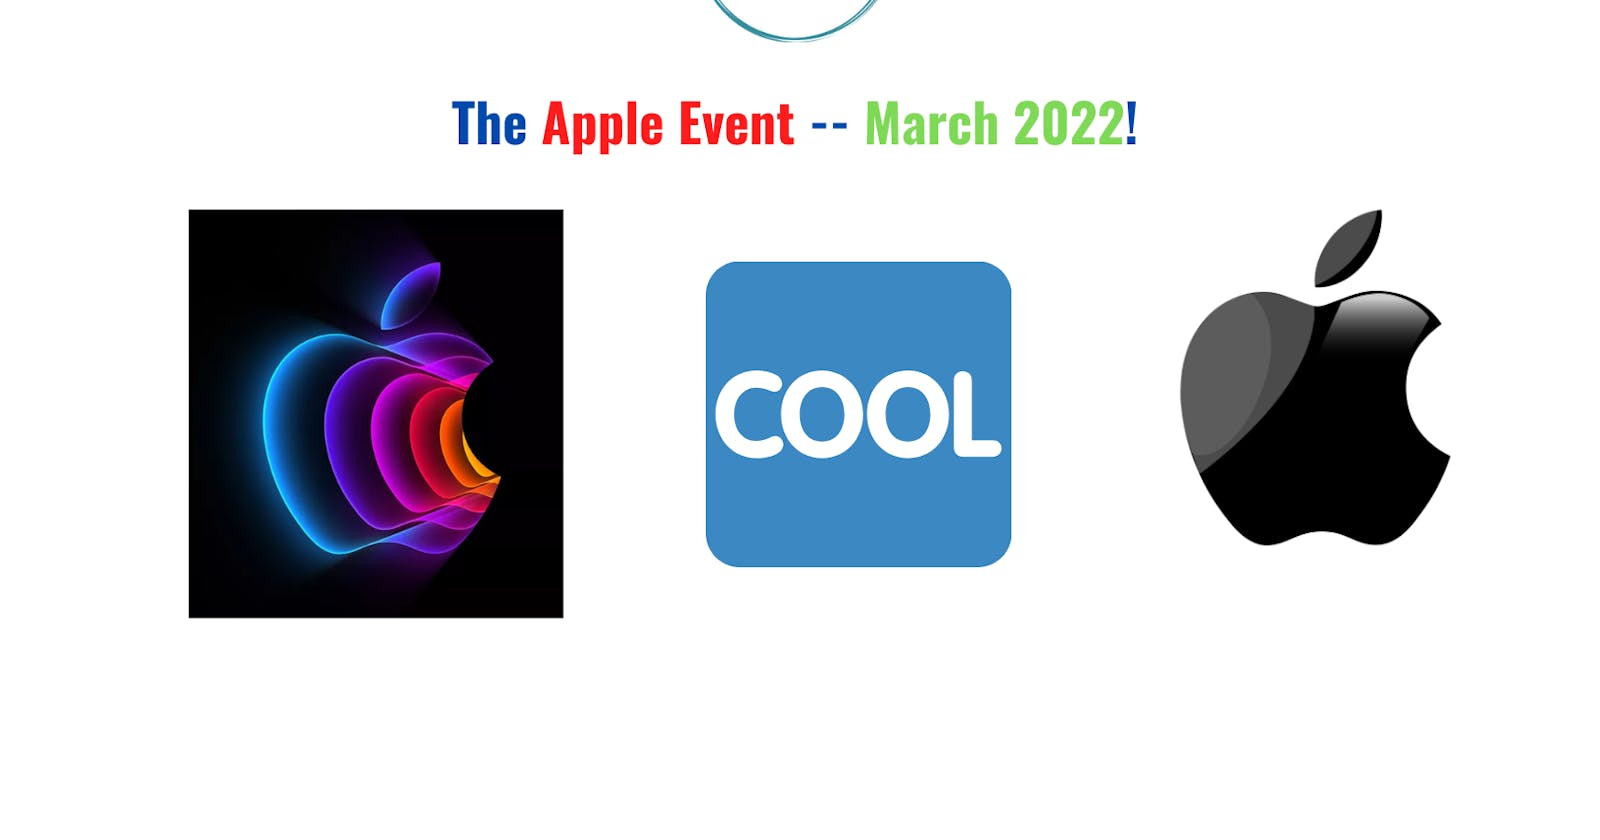 The Apple Event -- March 2022!